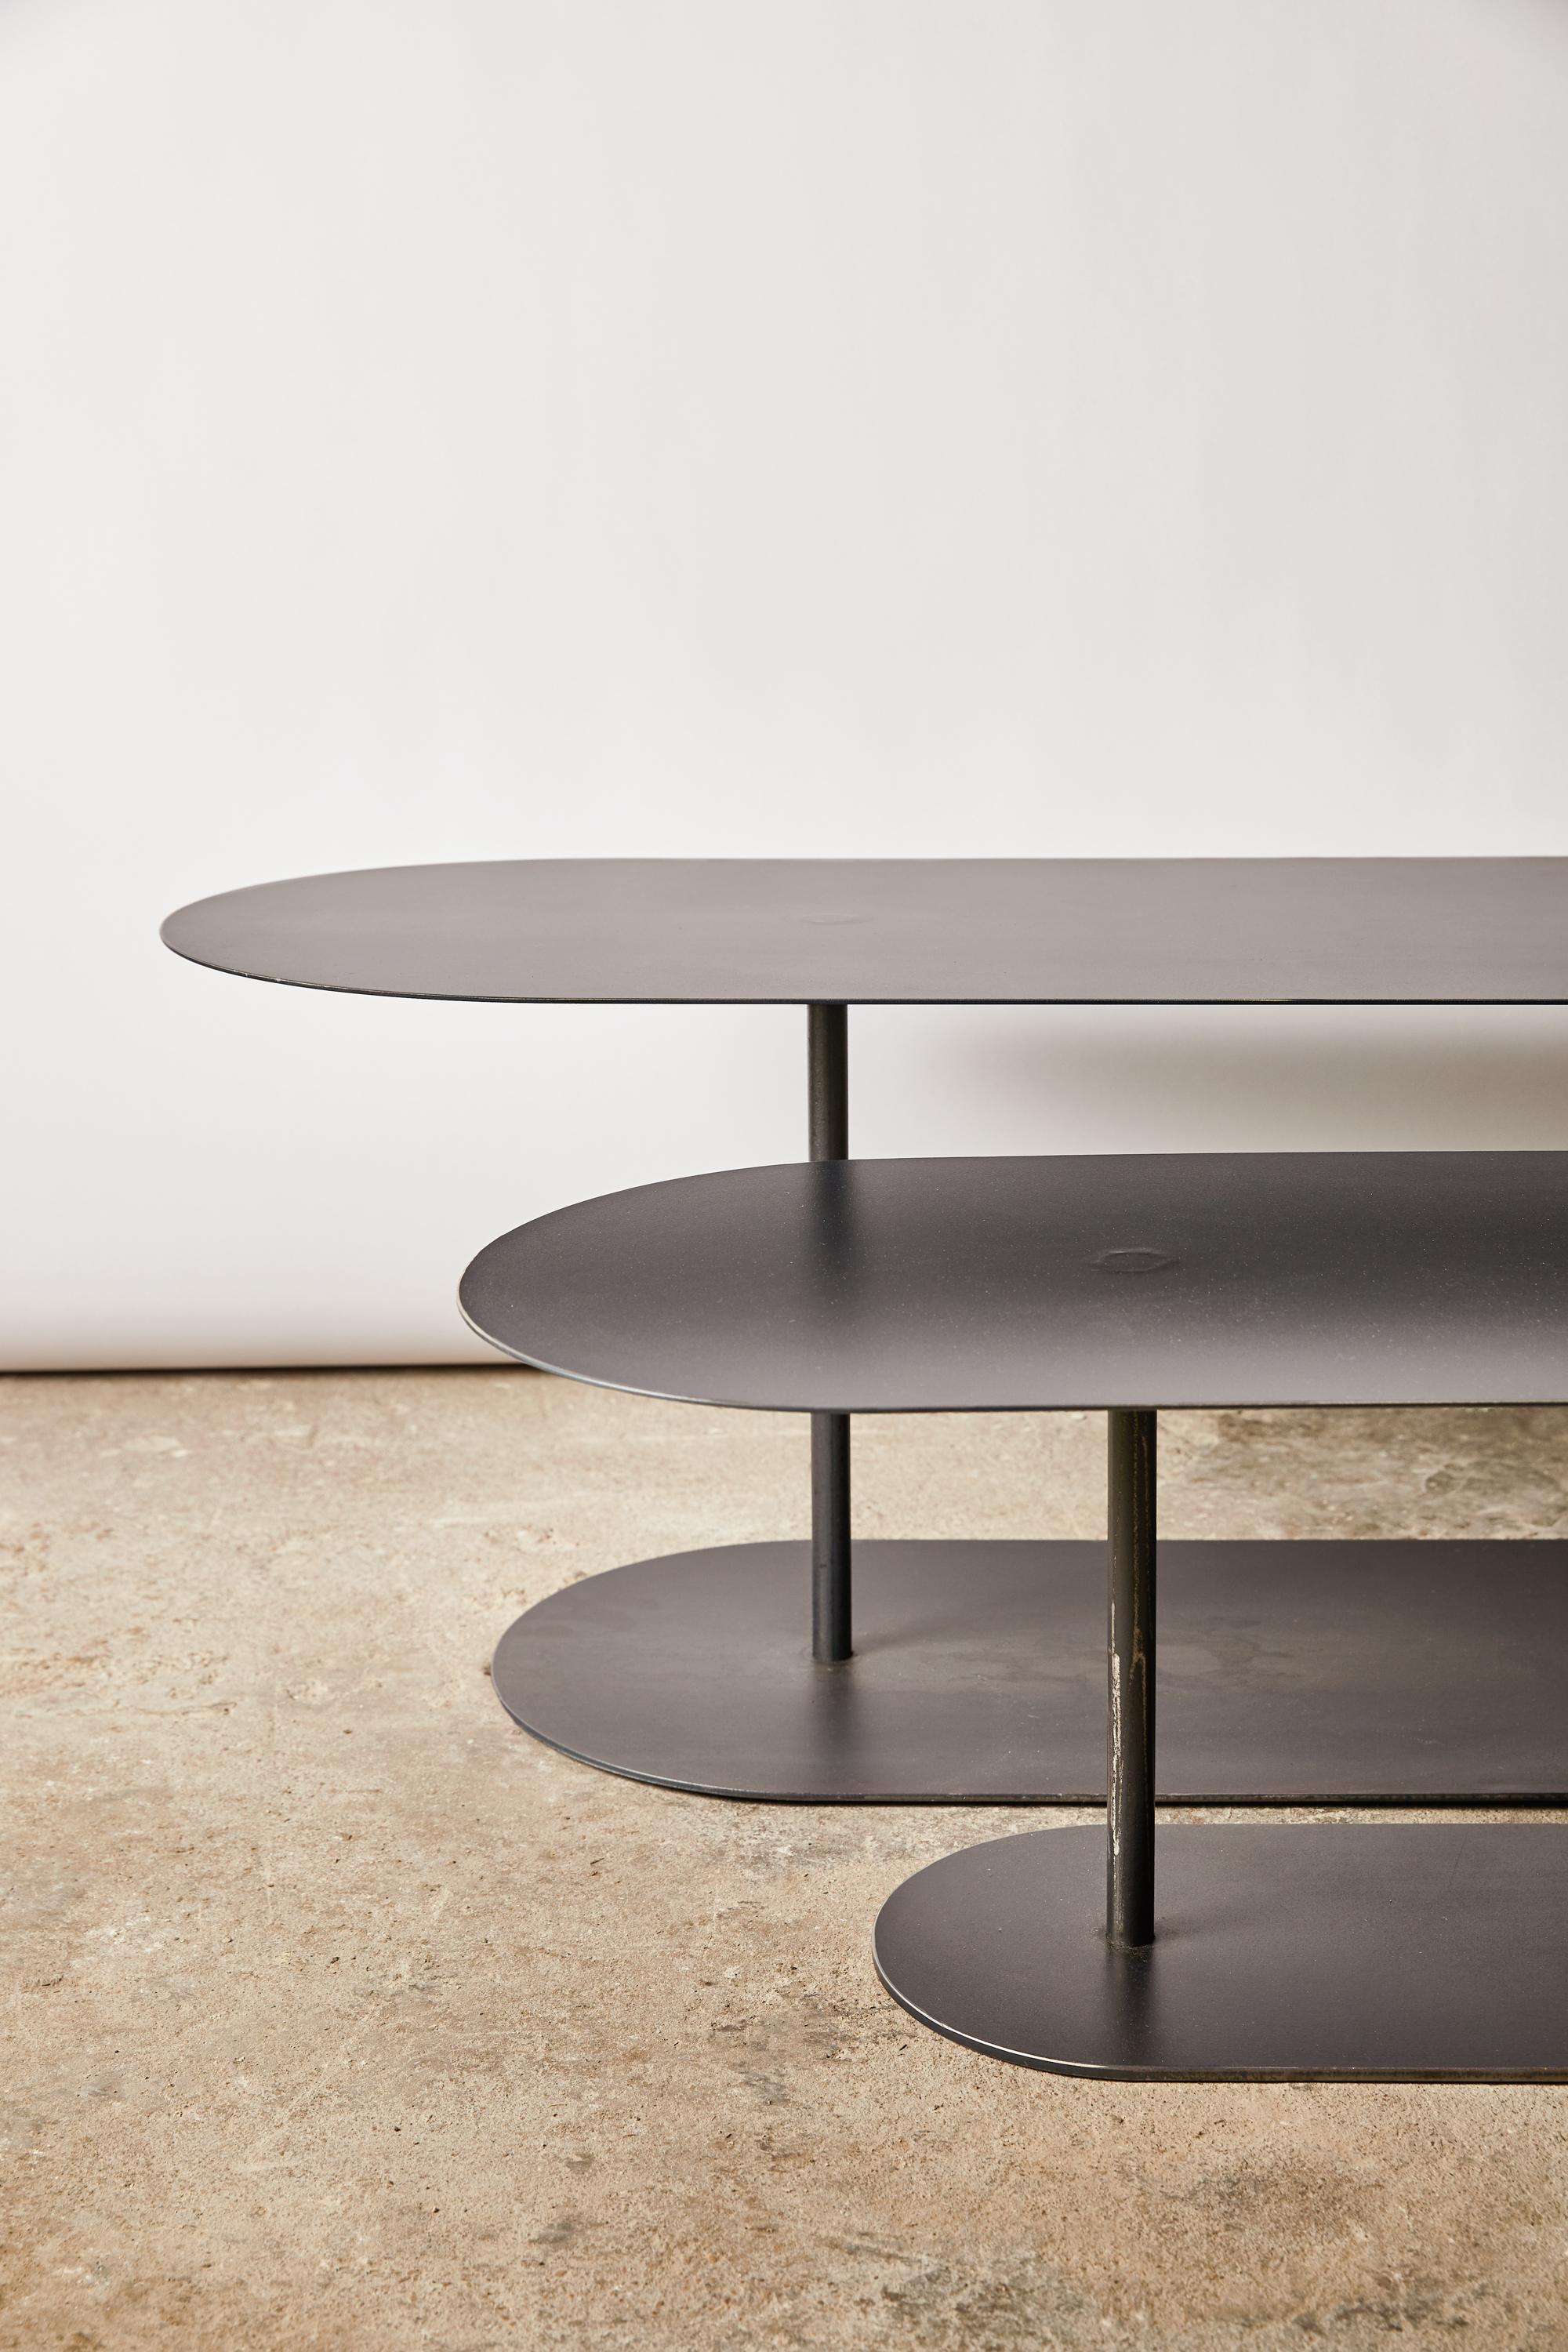 Pair of Ellipses tables signed by Pia Chevalier
Also available in oxidized steel.
Dimensions:
Large: 120 x 40 cm h. 40 cm
Small: 90 x 30 cm h. 35 cm

Exists also in smaller version:
Large: 60 x 27 cm H. 45 cm
Small: 40 x 18 cm H. 40